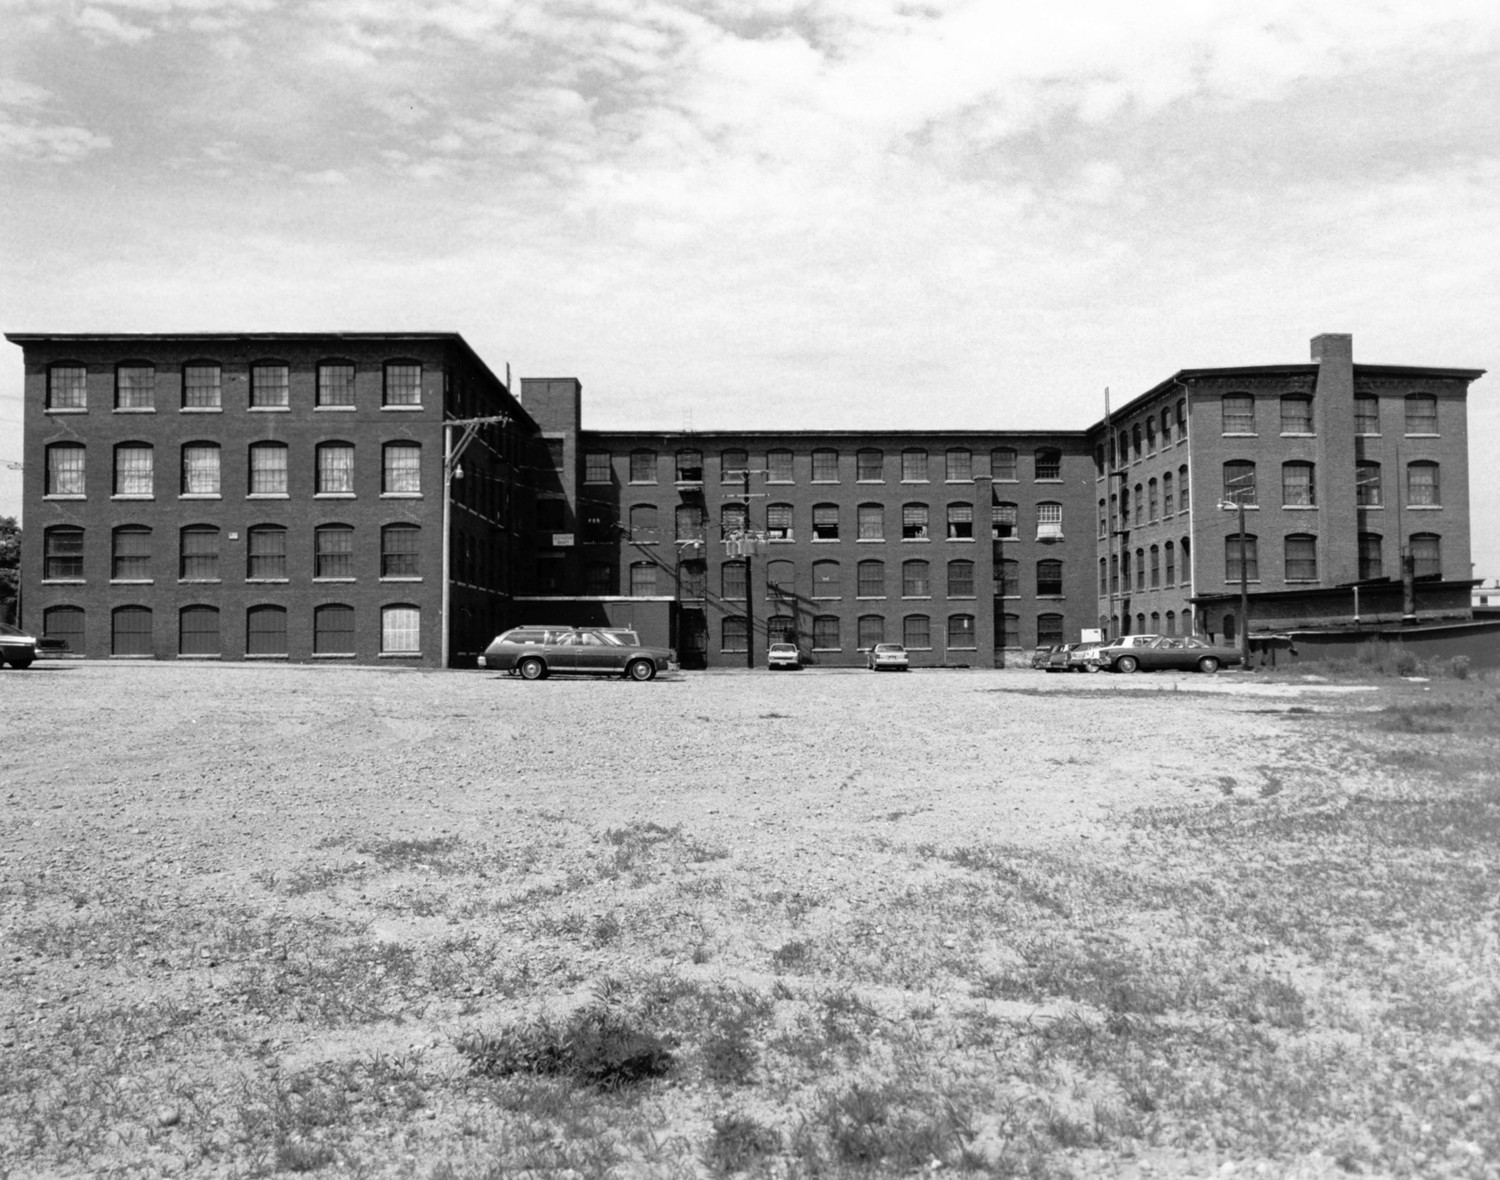 Kimball Brothers Shoe Factory, Manchester New Hampshire Looking west at the rear of the factory (1984)